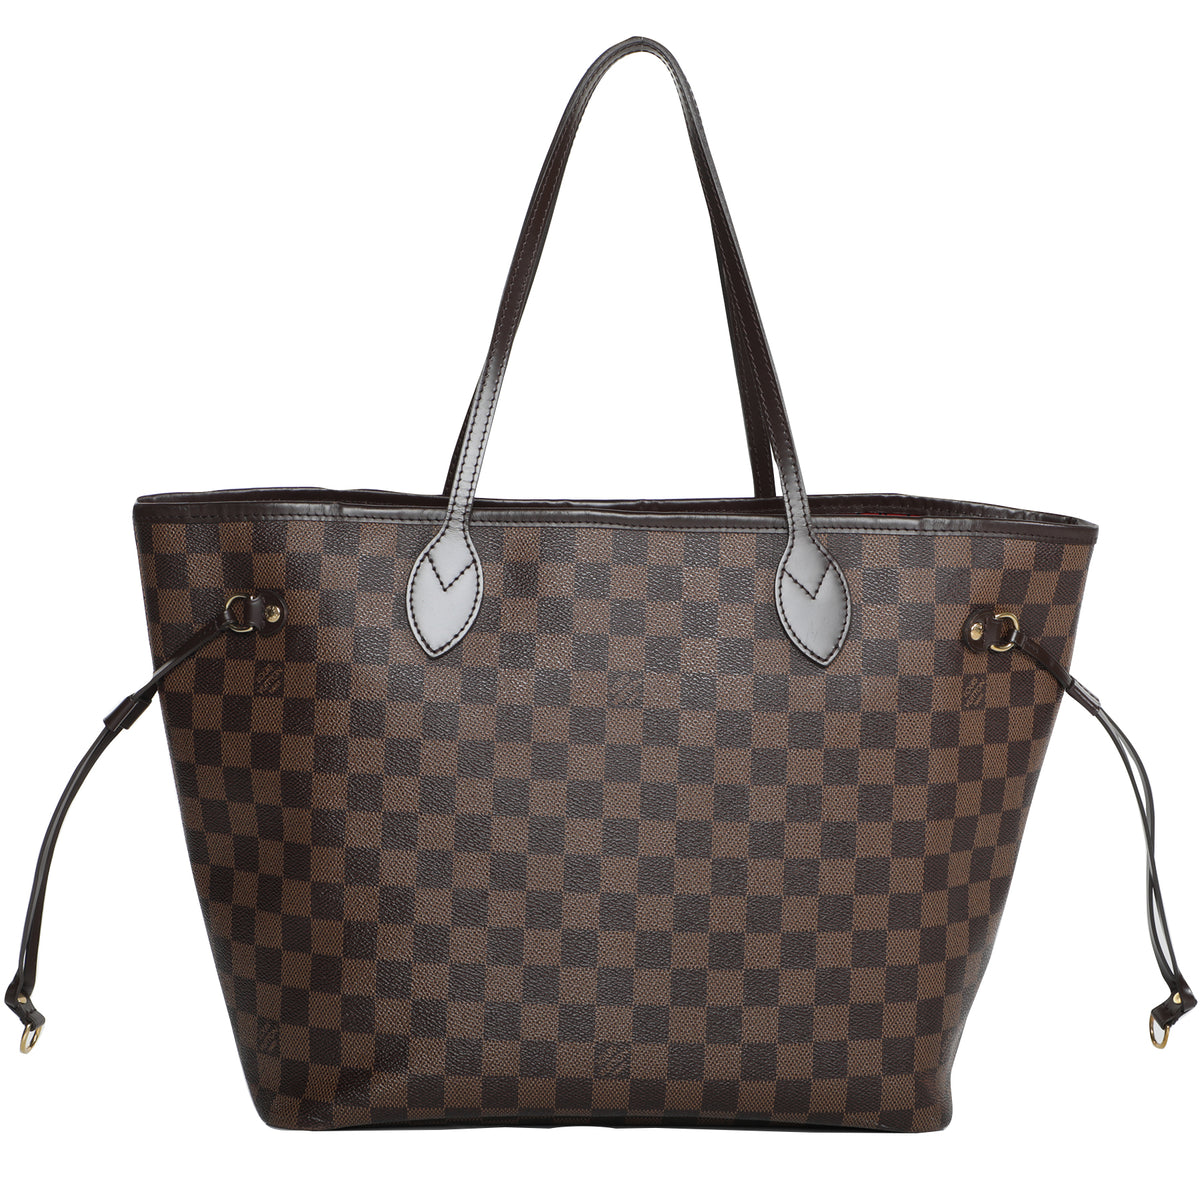 Louis Vuitton Neverfull Handbags for sale in Guatemala City